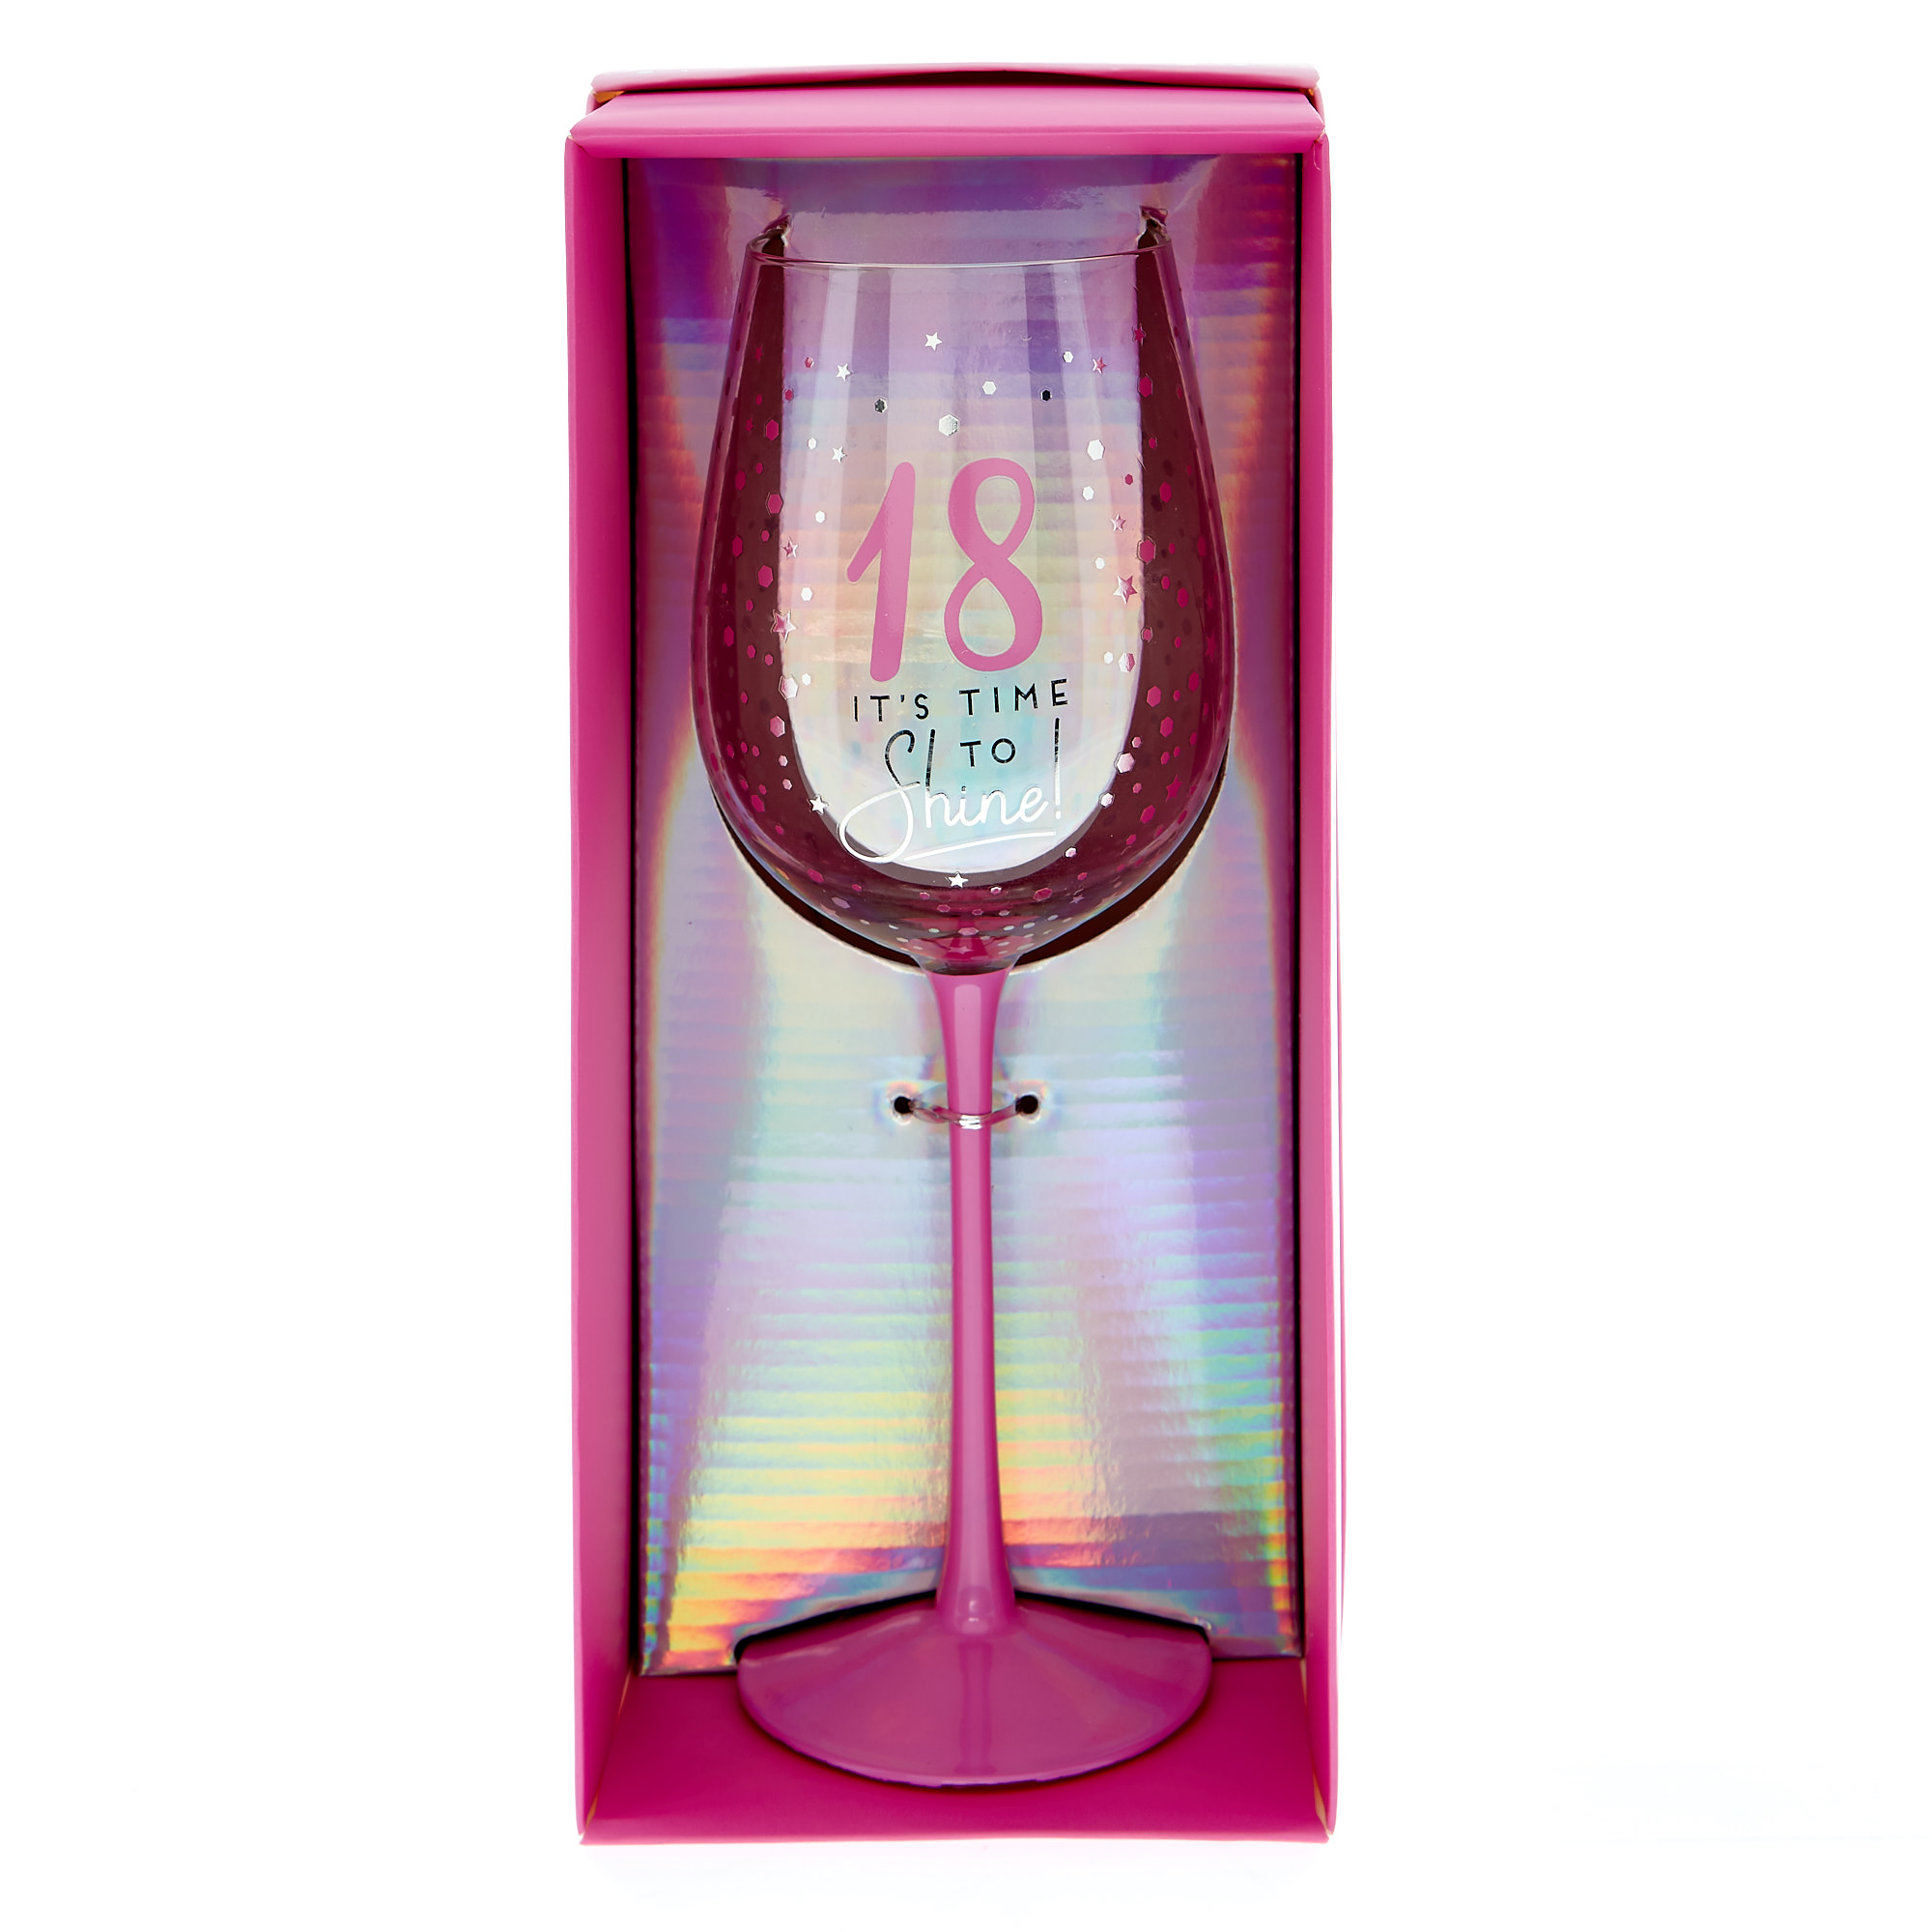 18 It's Time To Shine Wine Glass